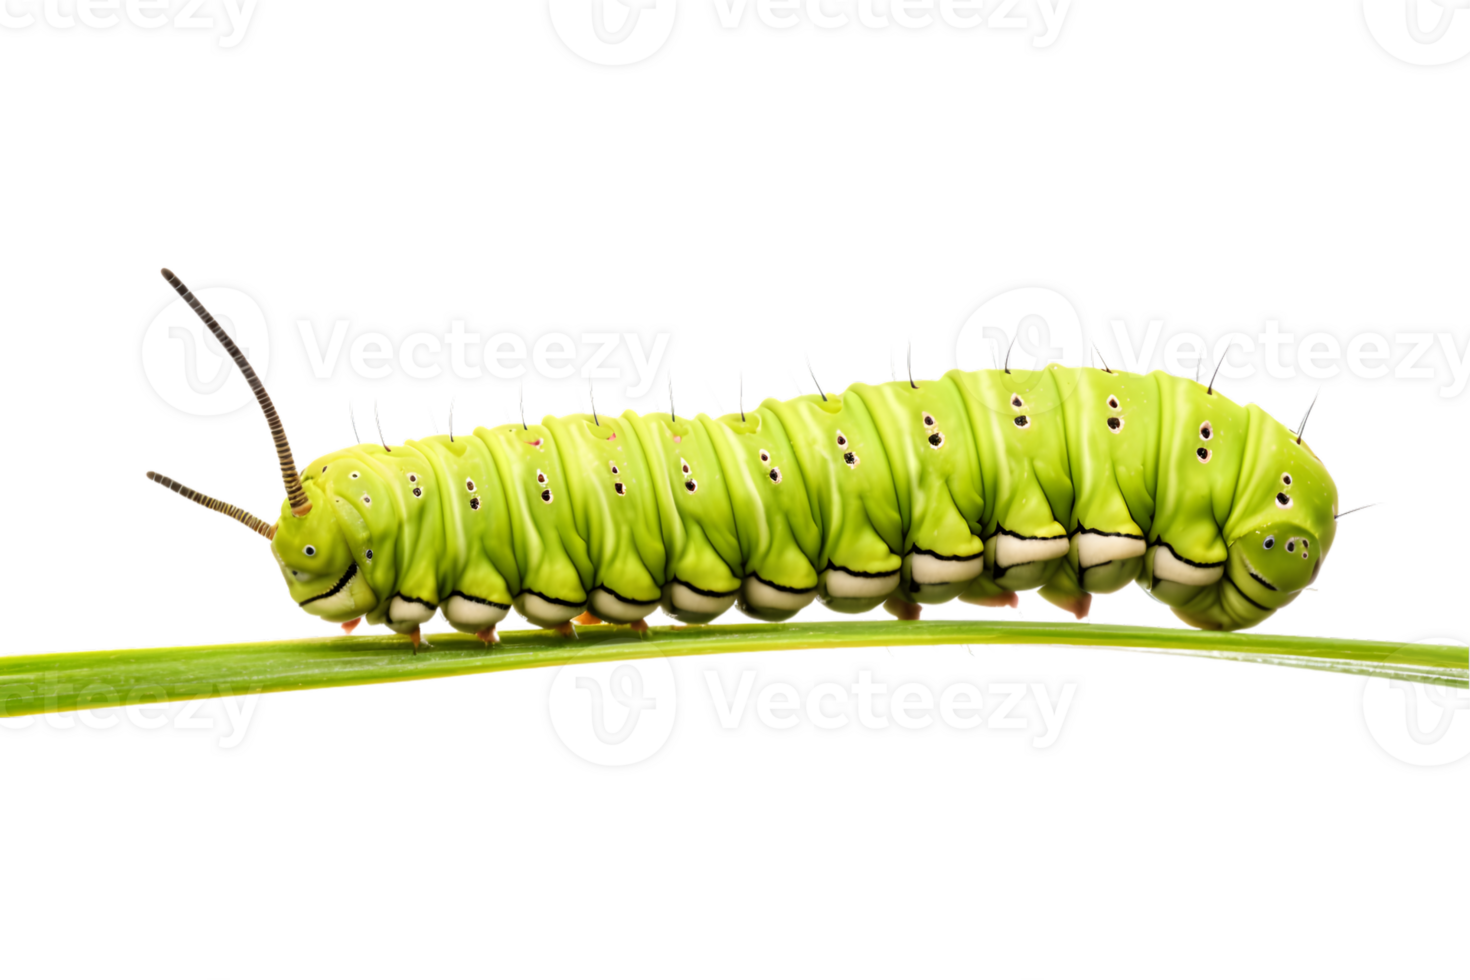 Swallowtail caterpillar isolated on a transparent background png